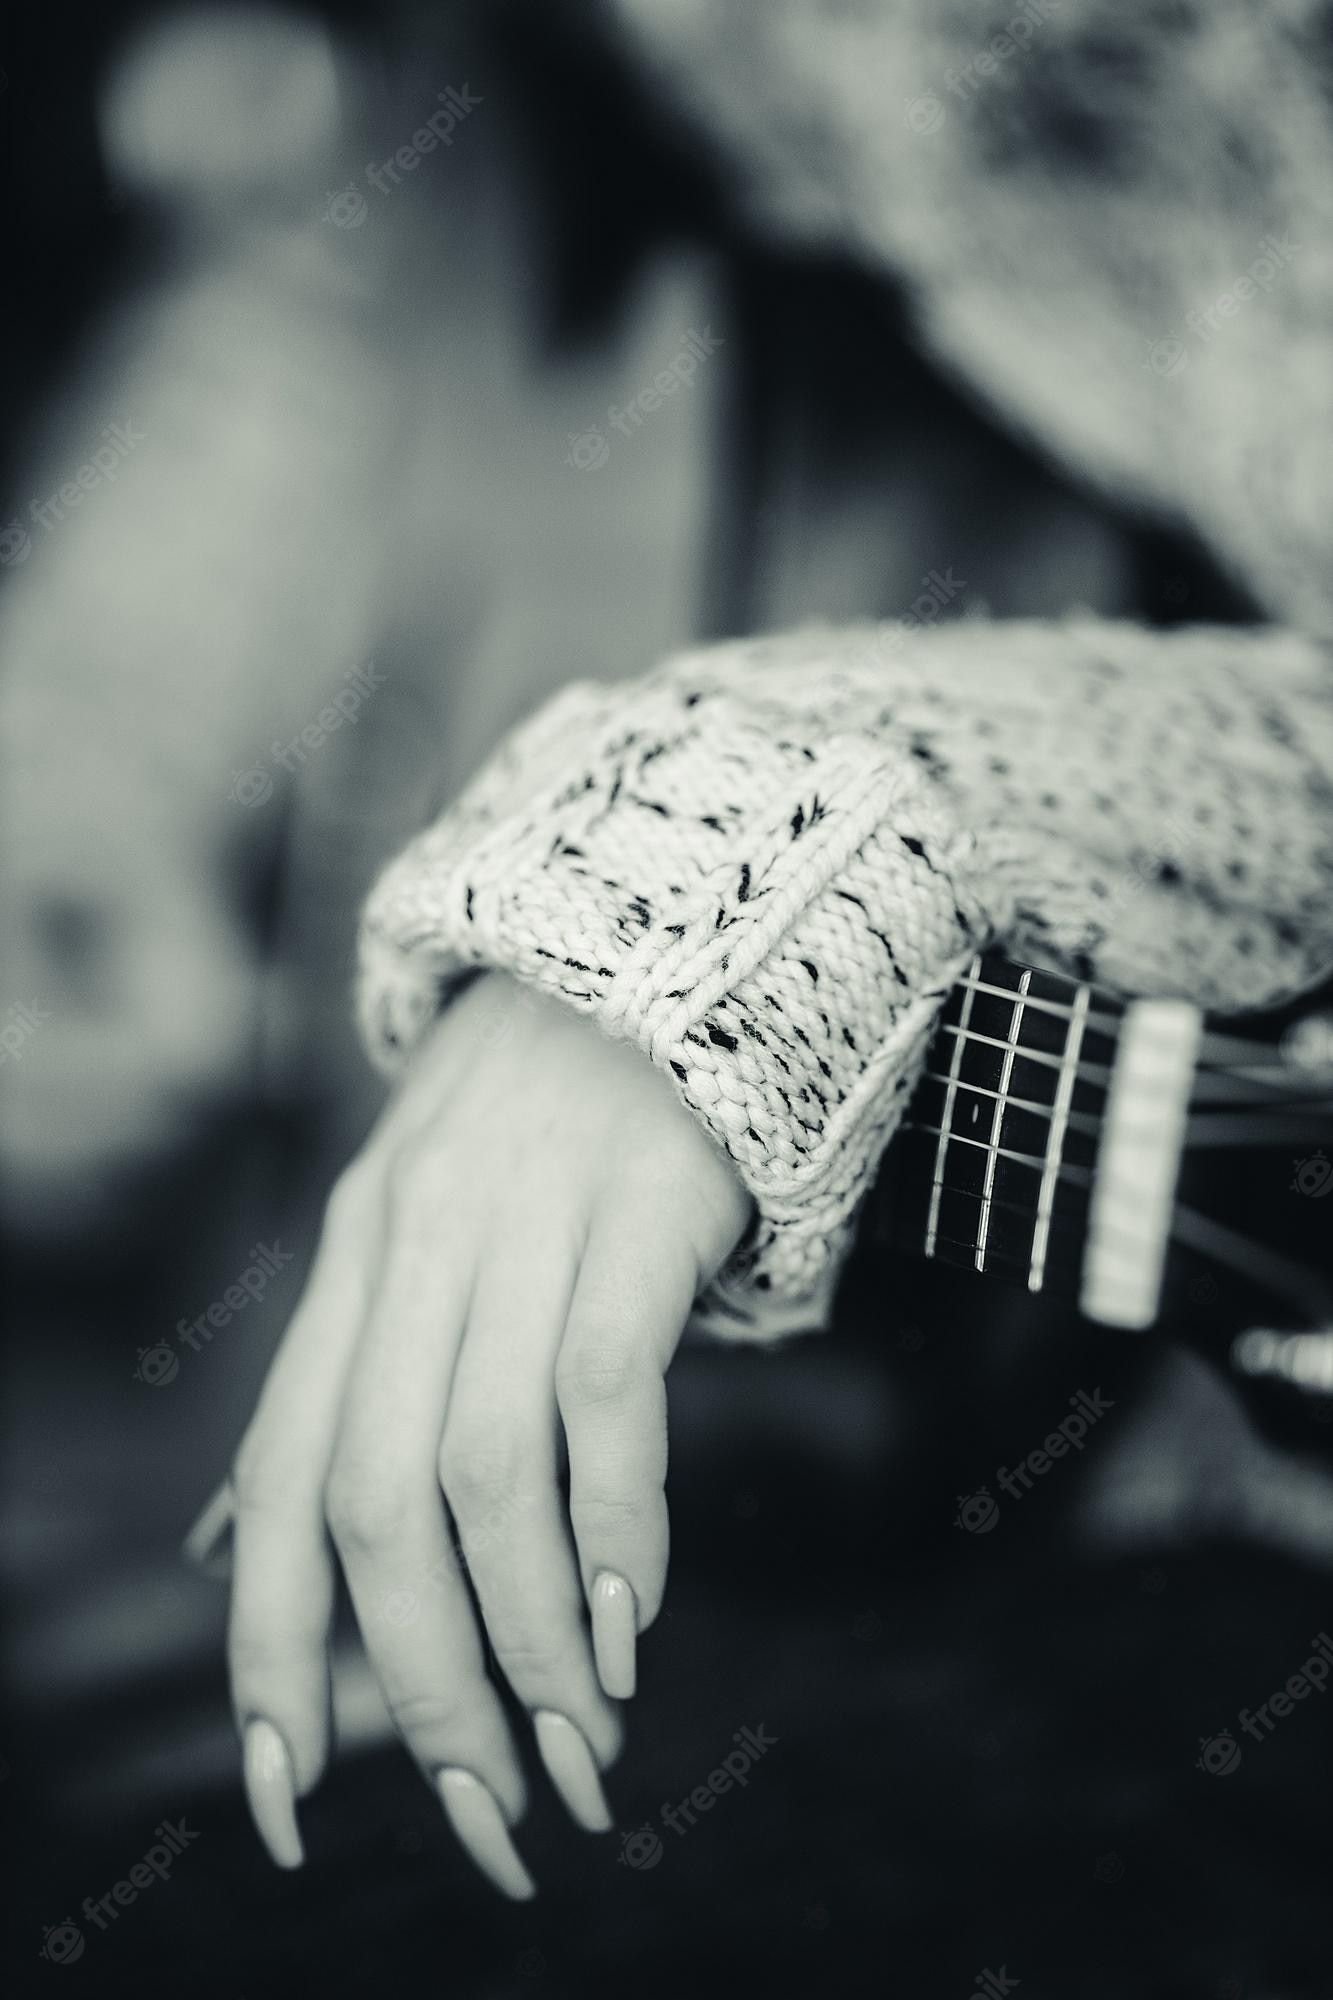 A woman's hand holding an acoustic guitar - Guitar